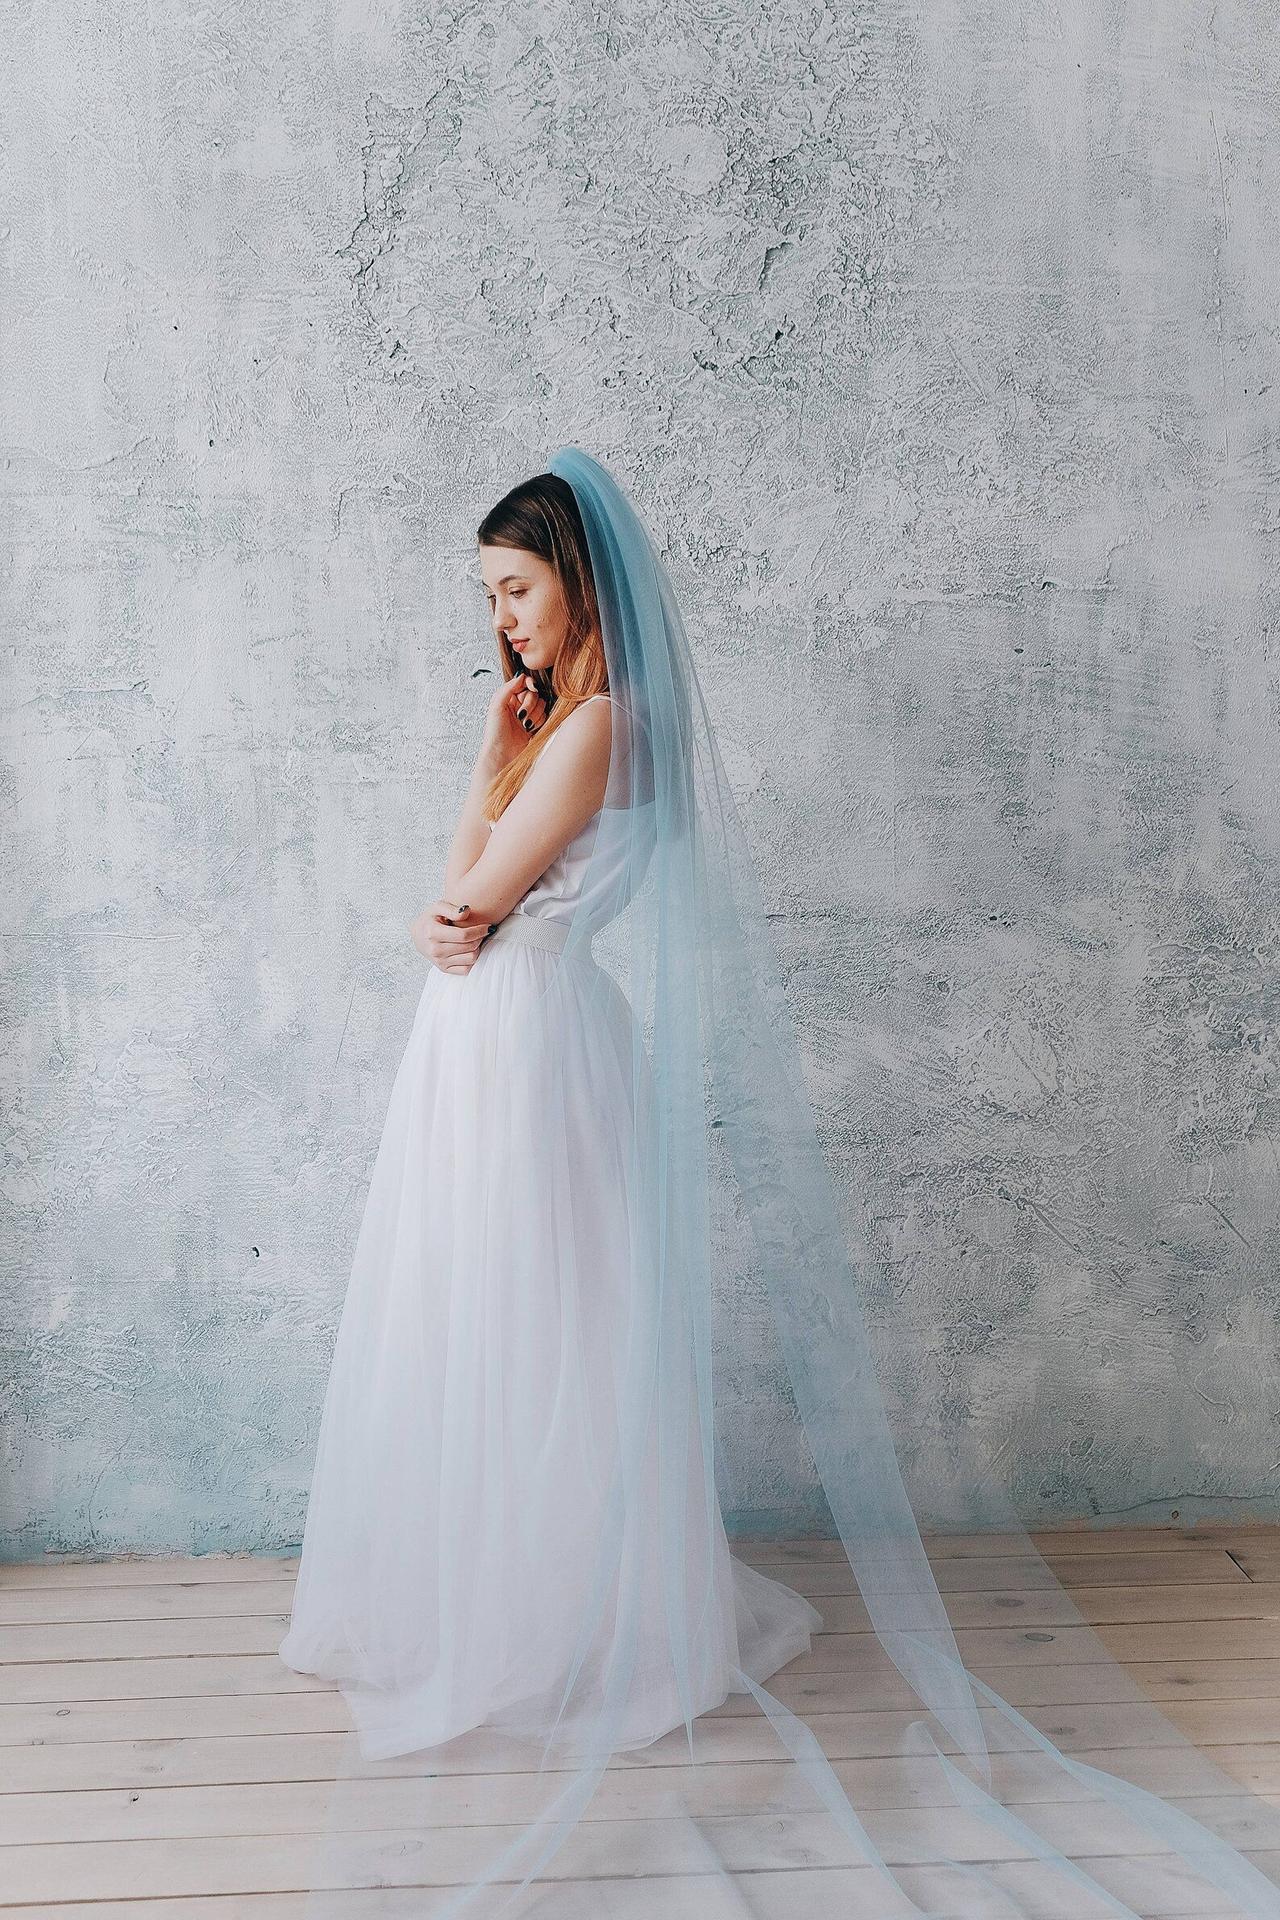 White bride with copper ombre hair wearing a white tulle skirt, silky white camisole and a sky blue sheer tulle veil